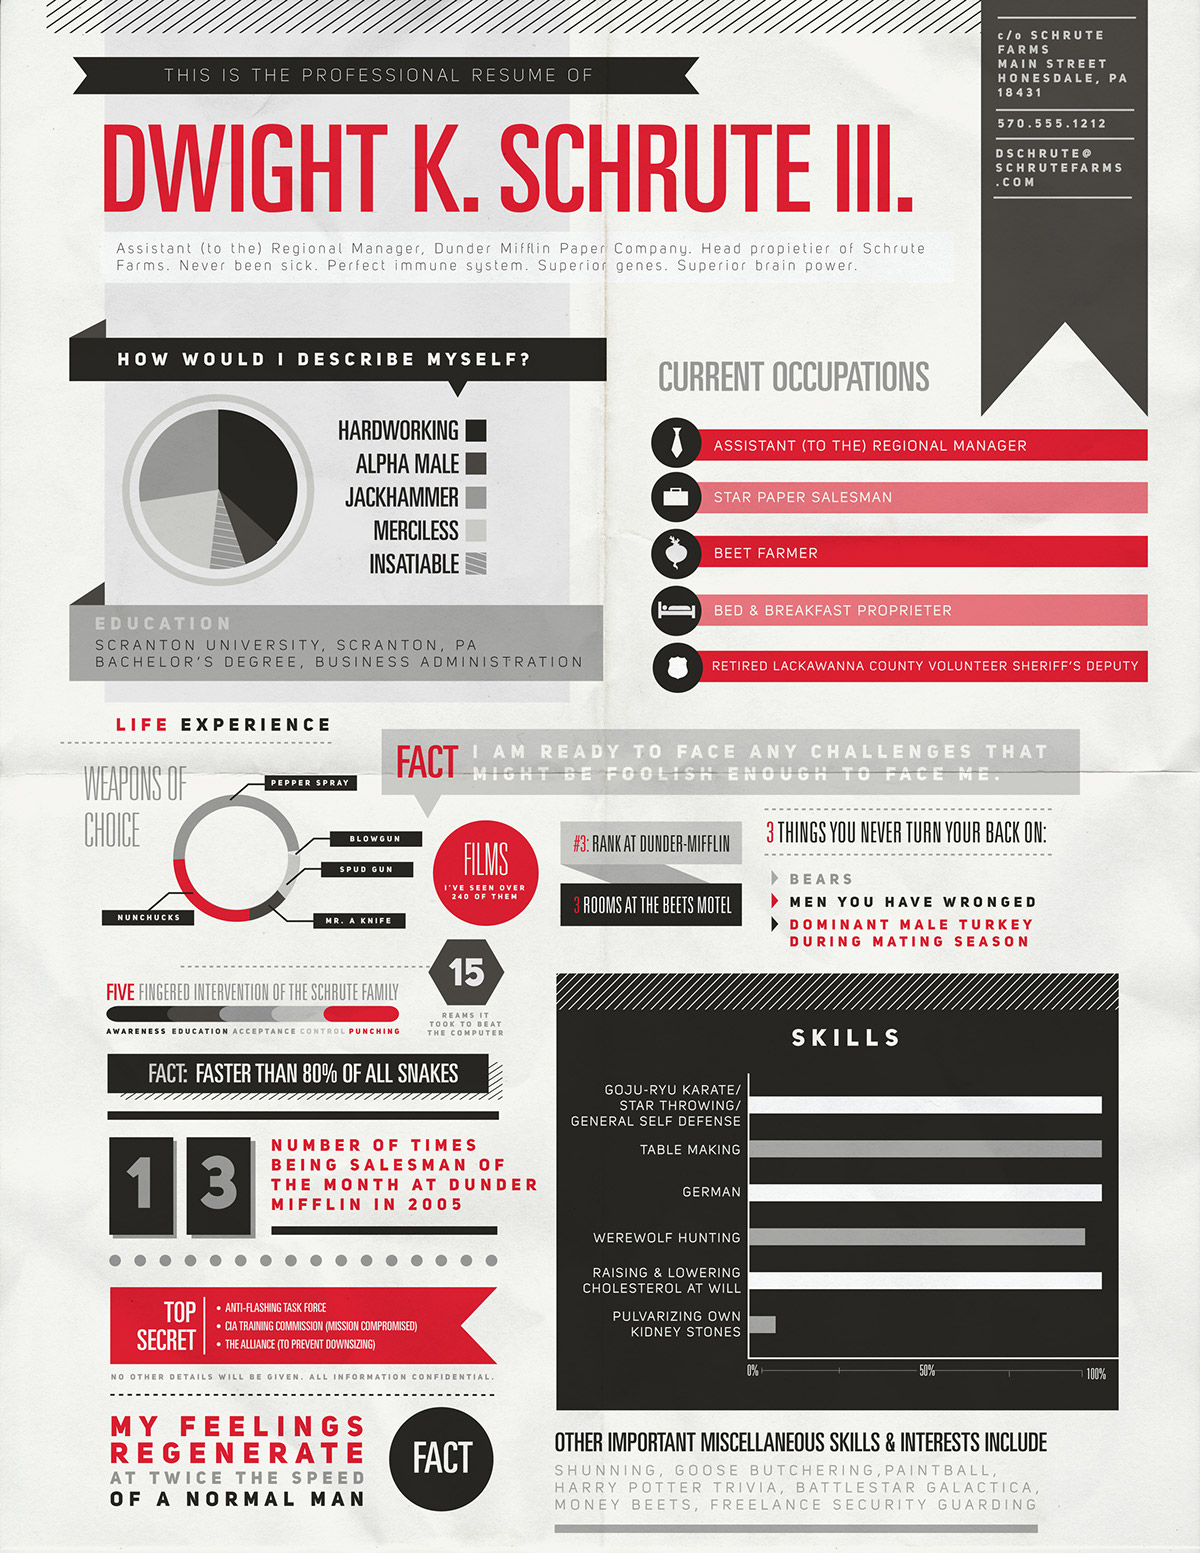 dwight schrute the office Resume infographics chart graph type sans serif fake anything Fun funny nbc rainn wilson 3 color font dwight k schrute dwight quotes dwight schrute quotes the office quotes office fan art pie chart pie graph red black